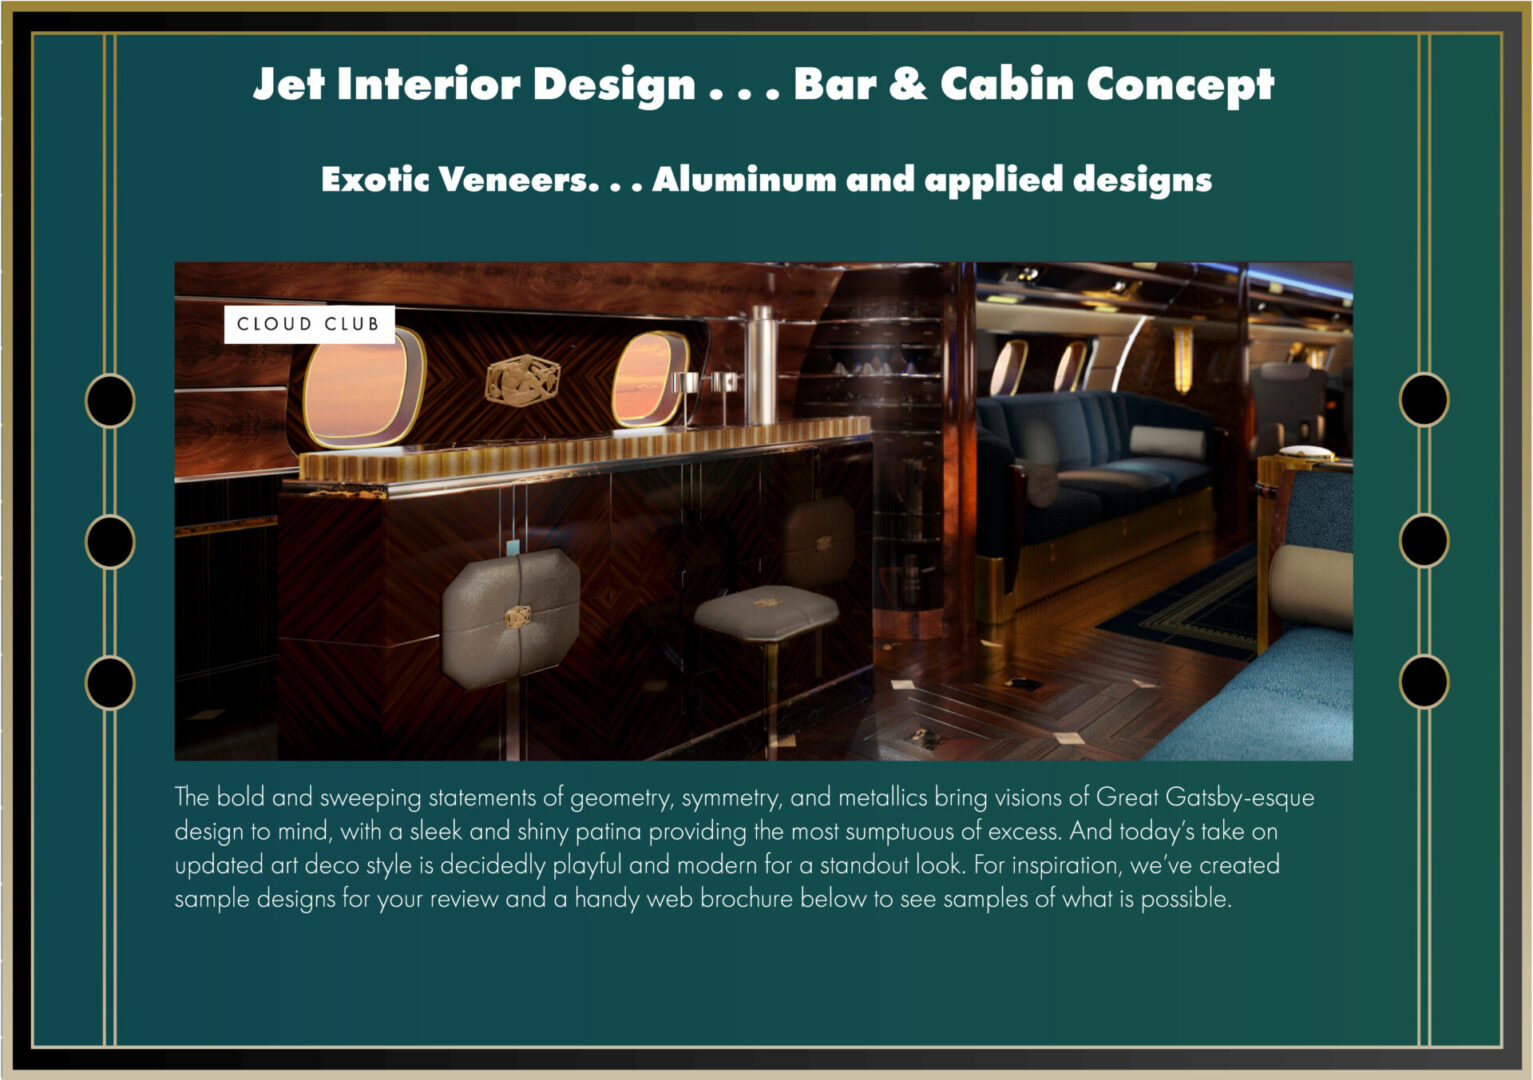 Jet Interior Design with Bar and Cabin Concept